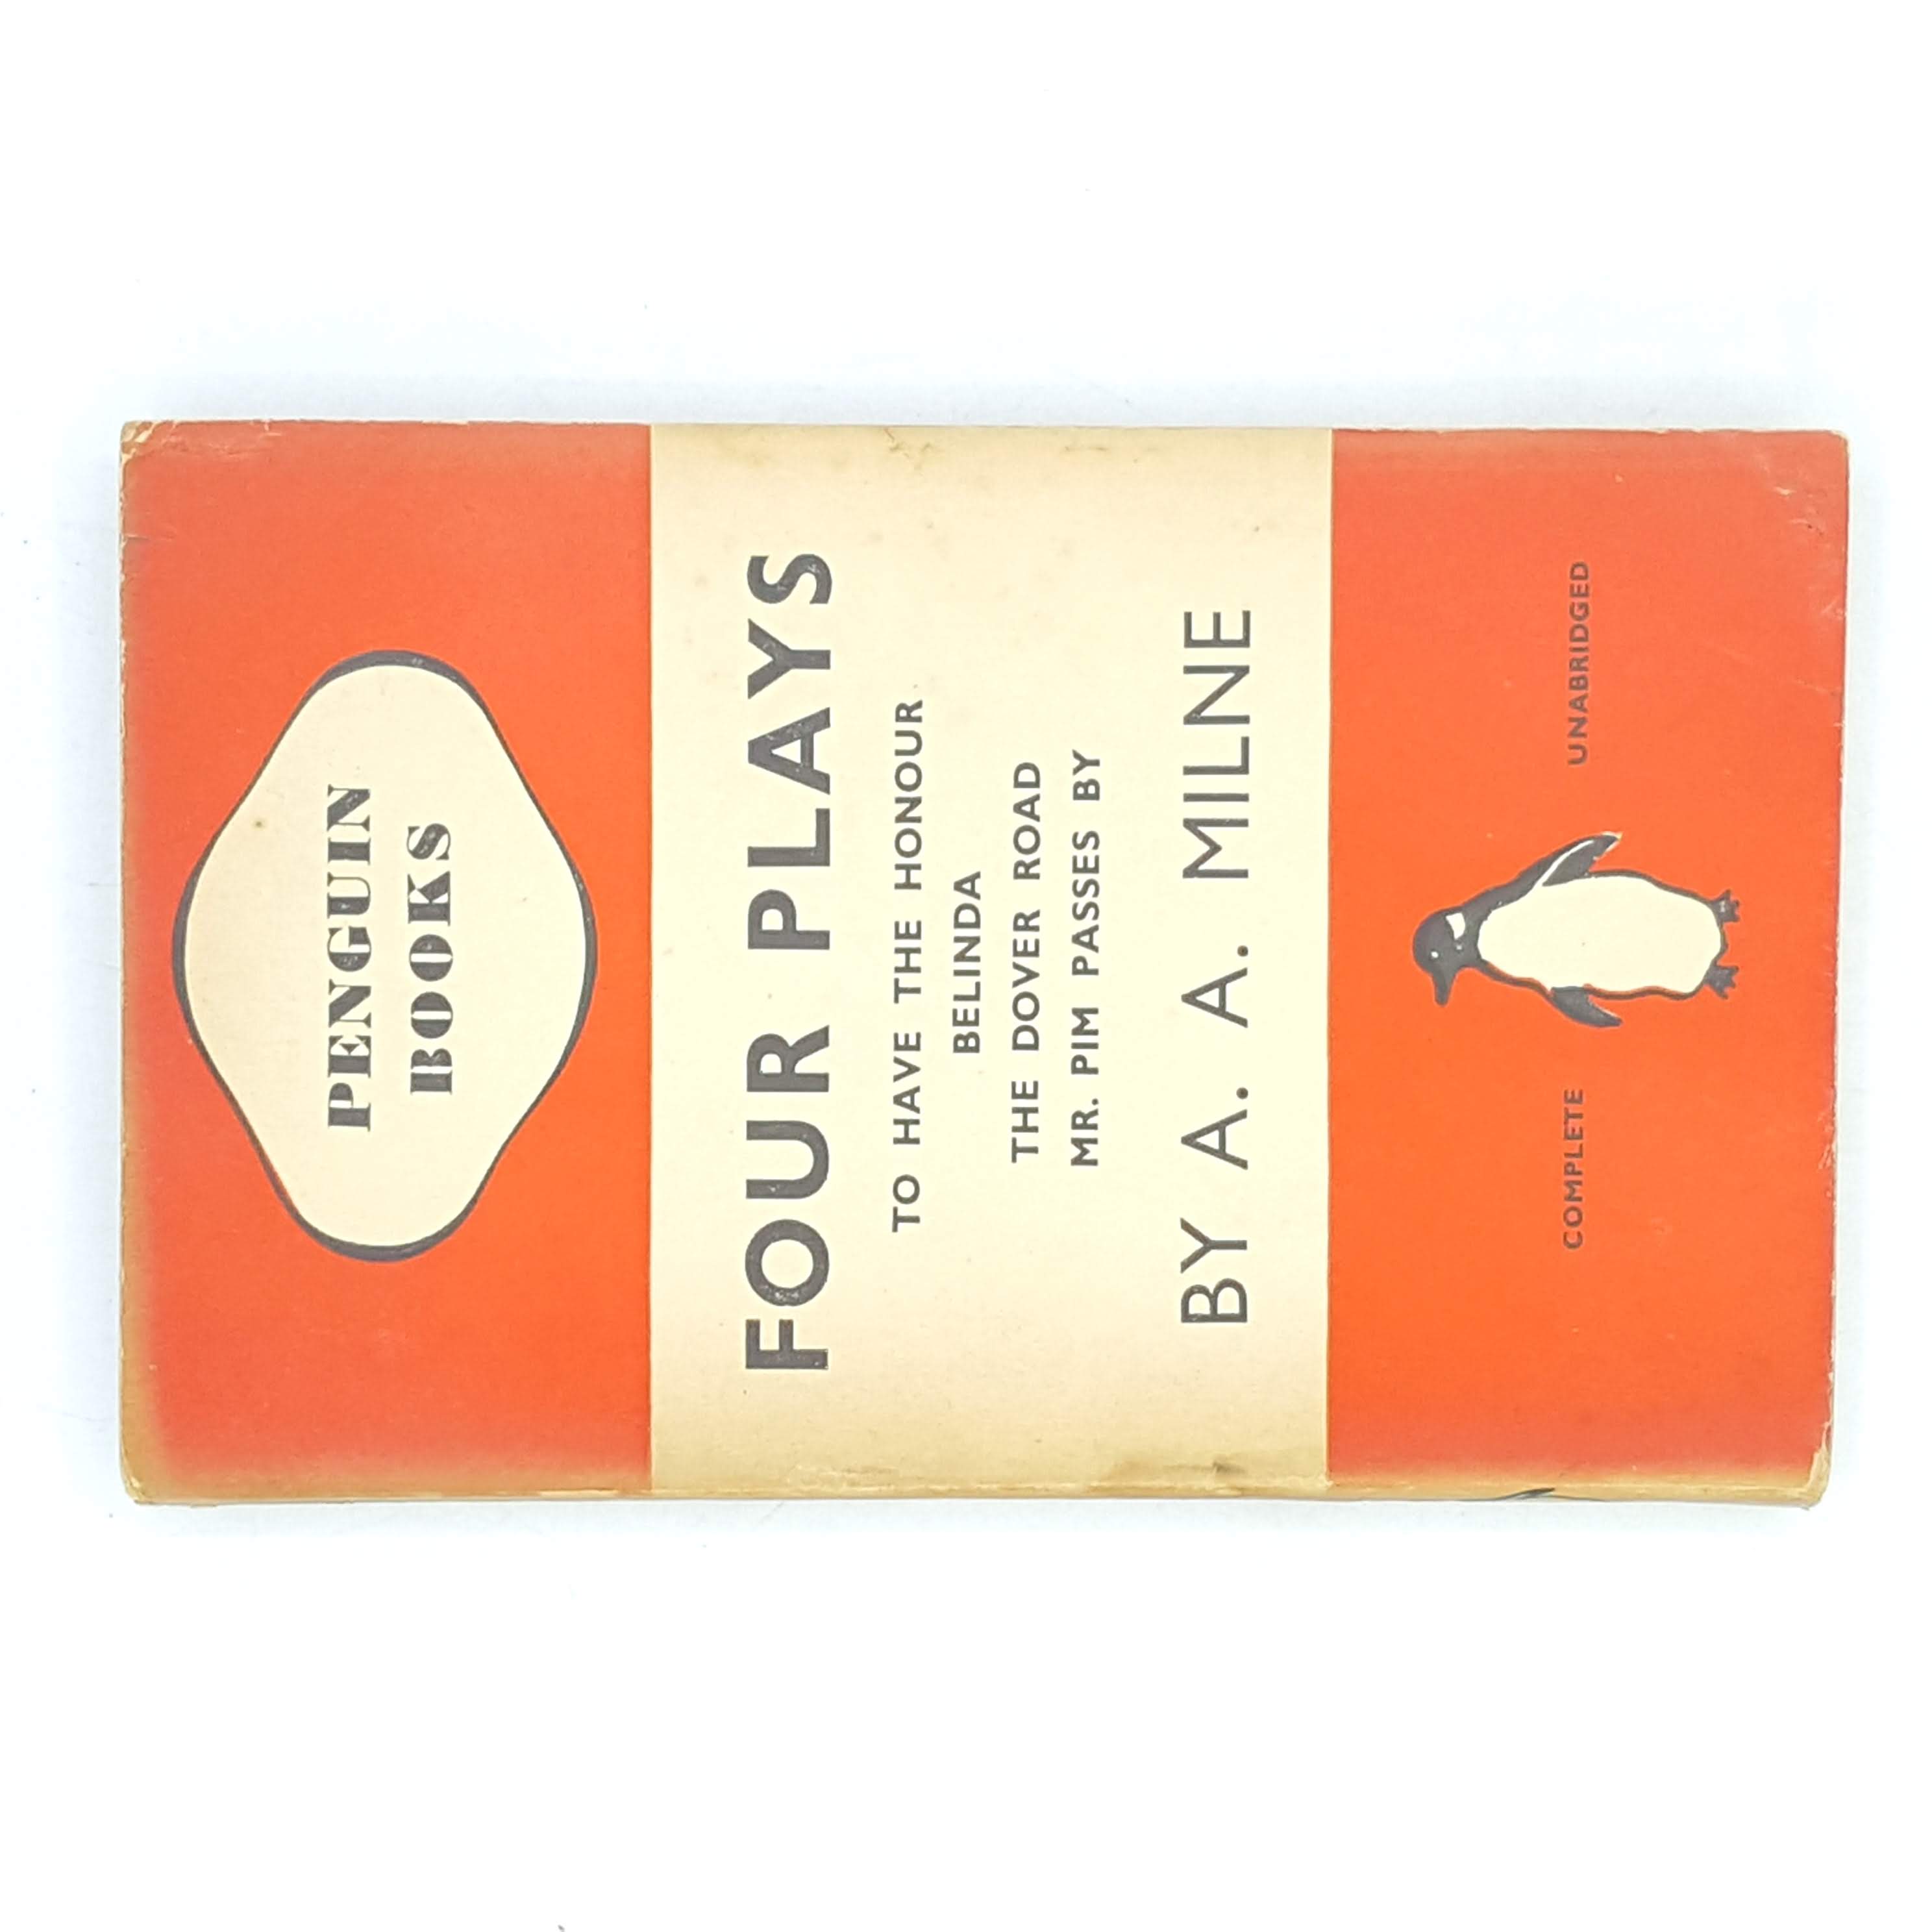 FIRST EDITION: A. A. MILNE'S FOUR PLAYS - PENGUIN 1939